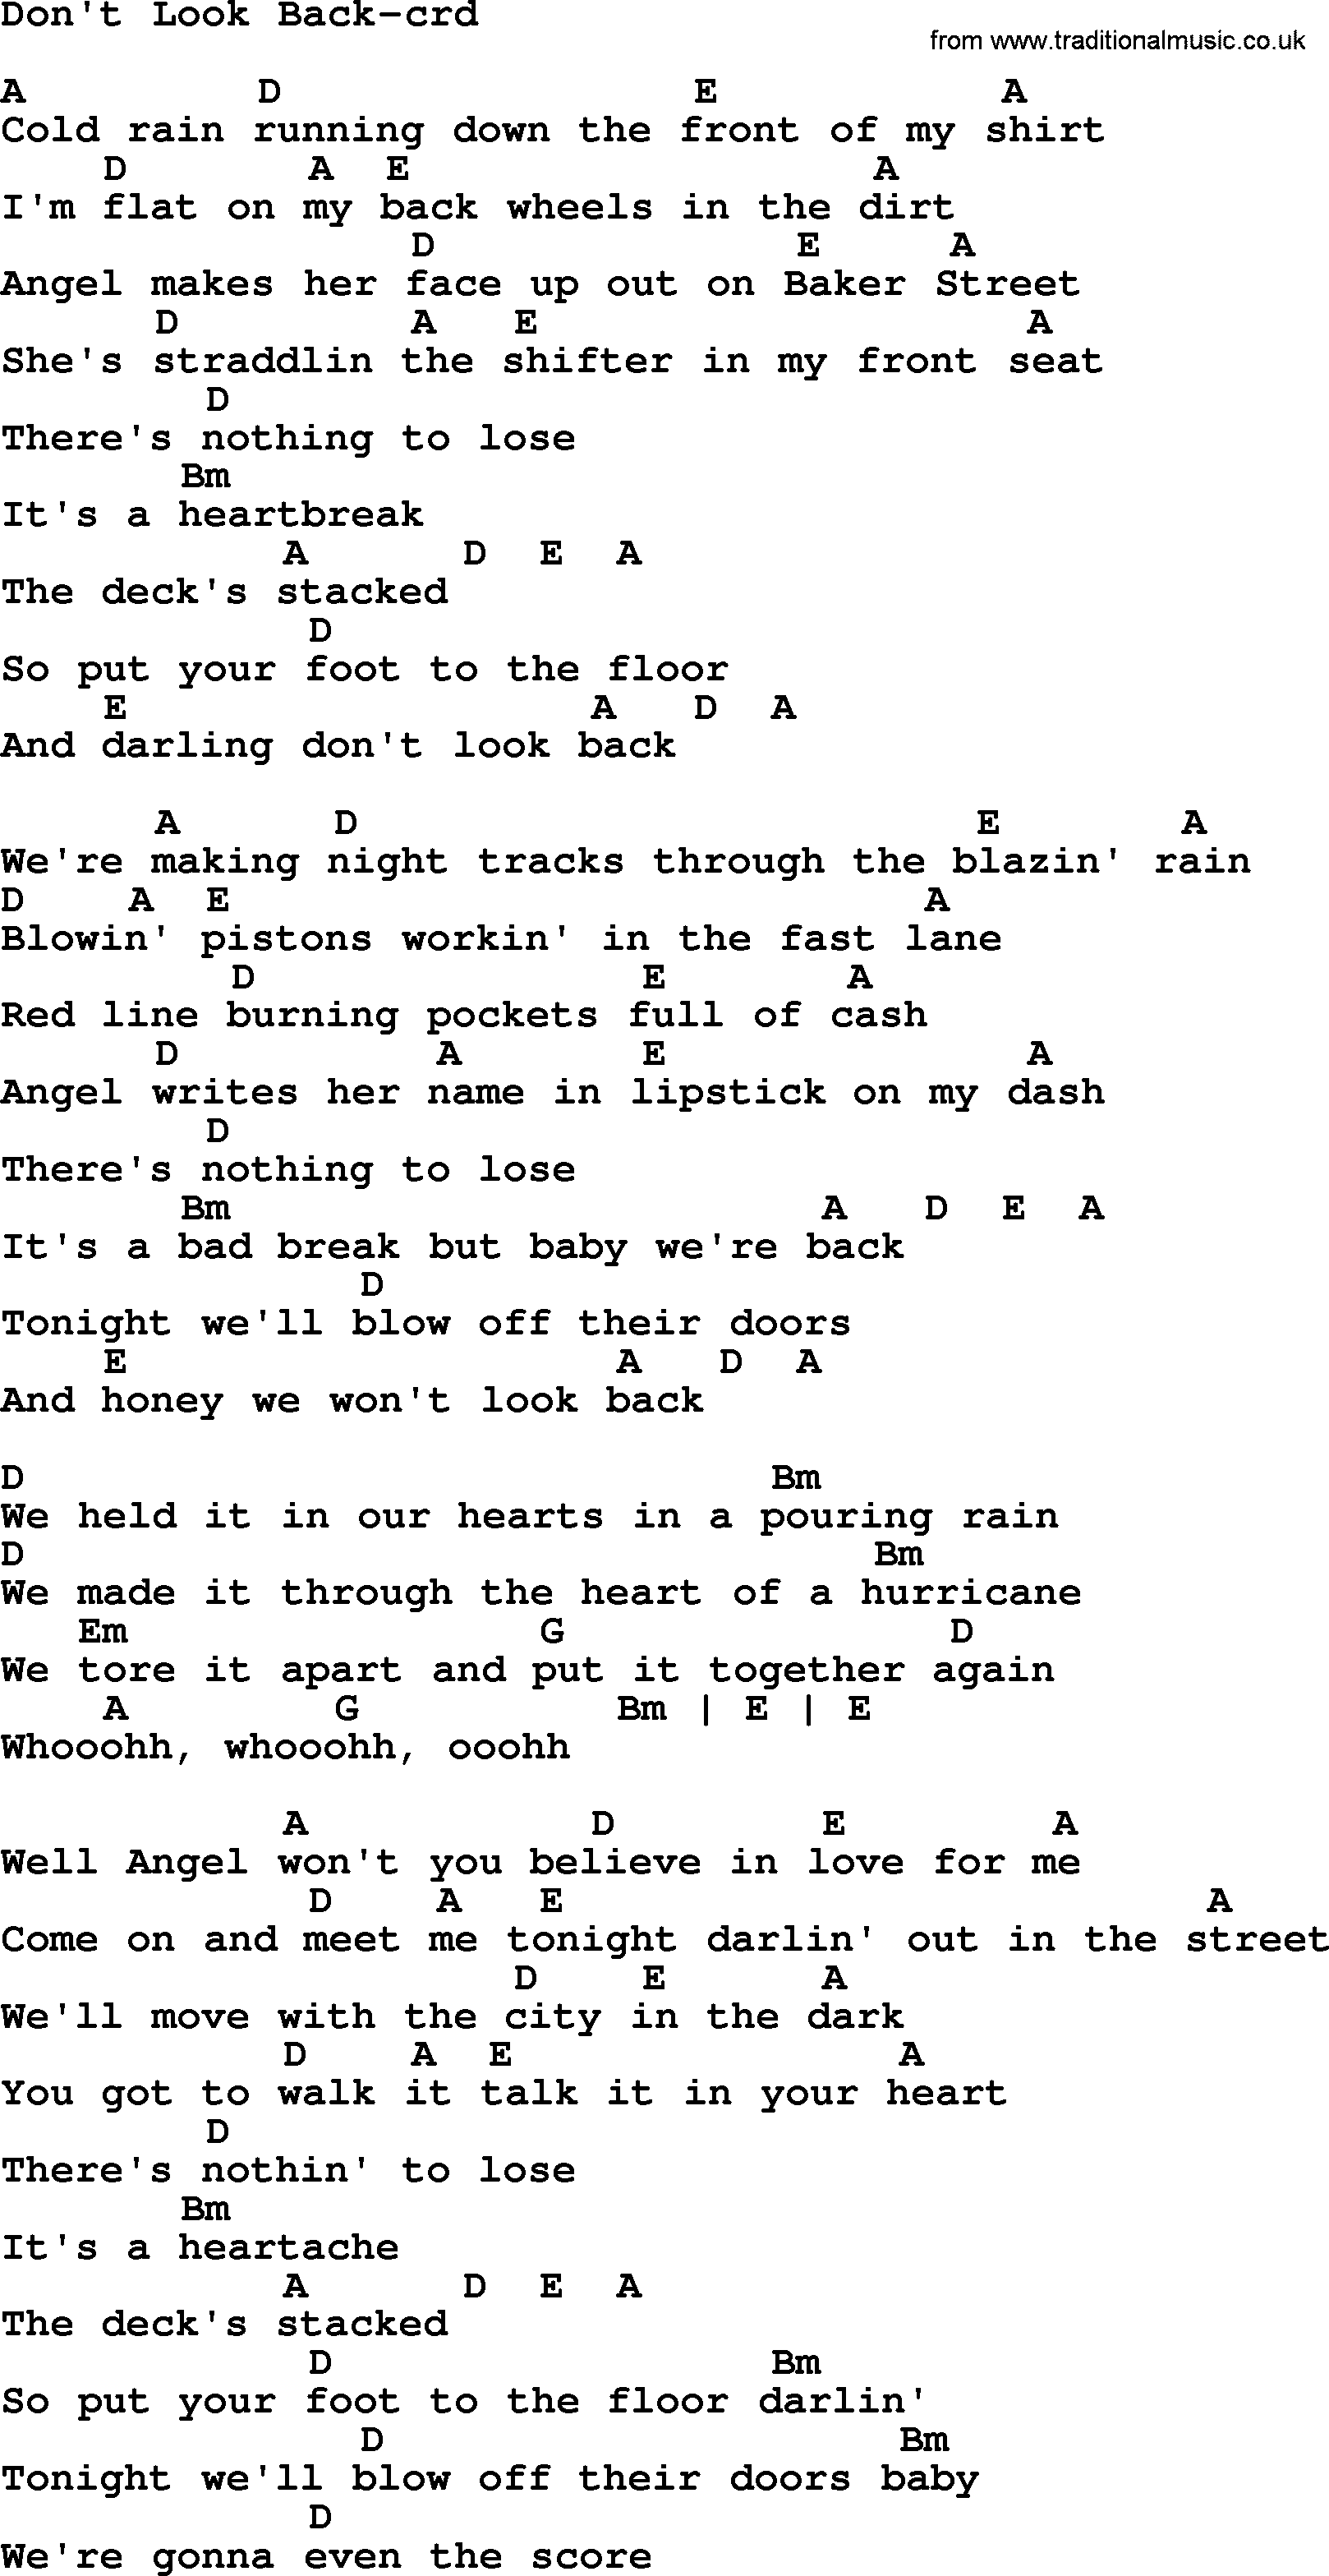 Bruce Springsteen song: Don't Look Back, lyrics and chords